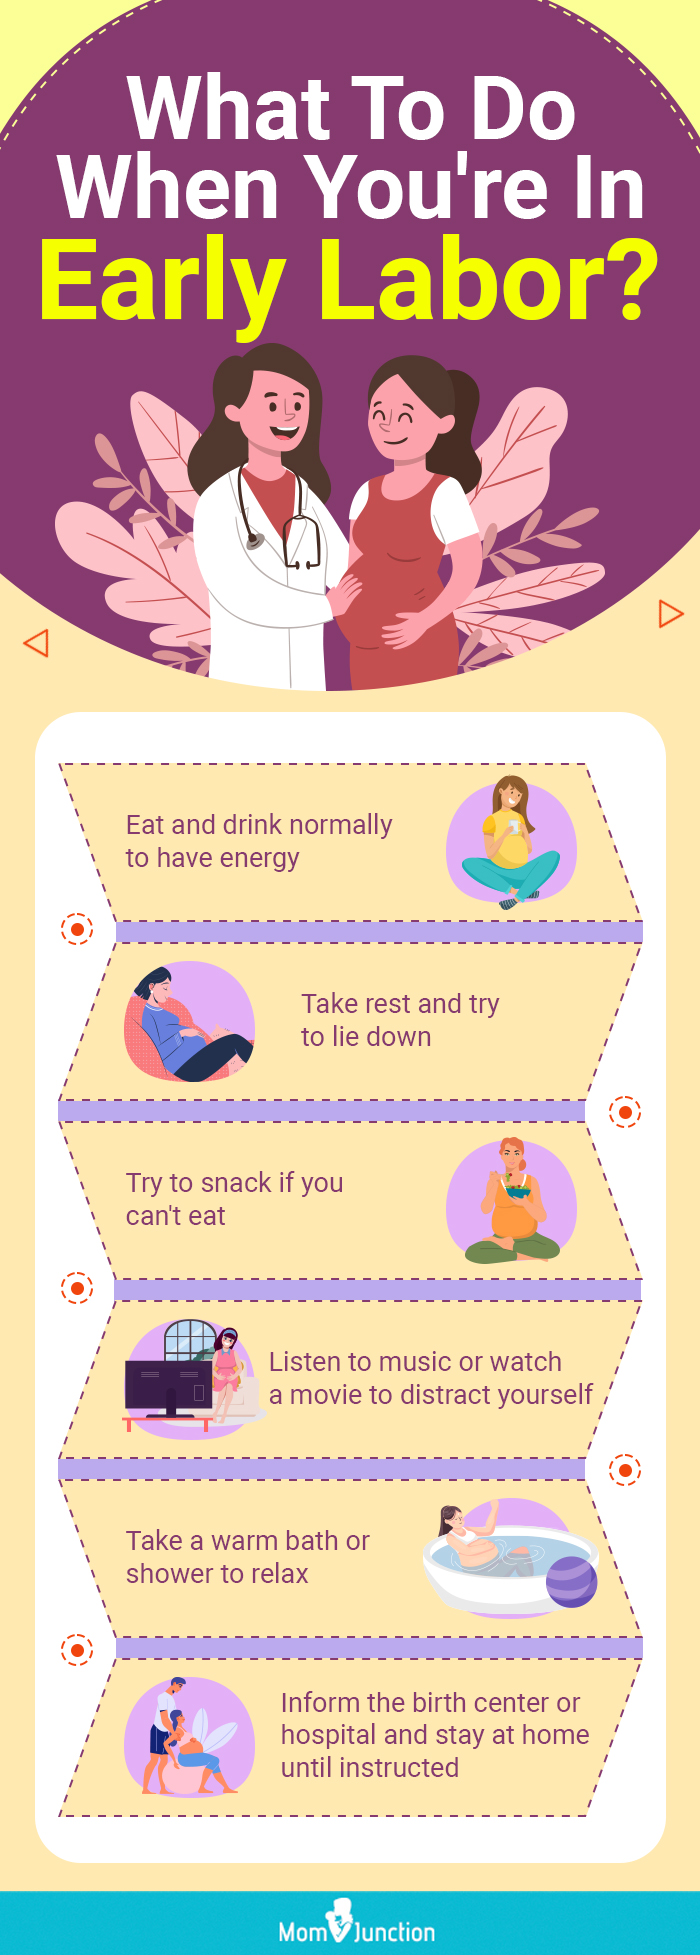 what to do when you're in early labor (infographic)